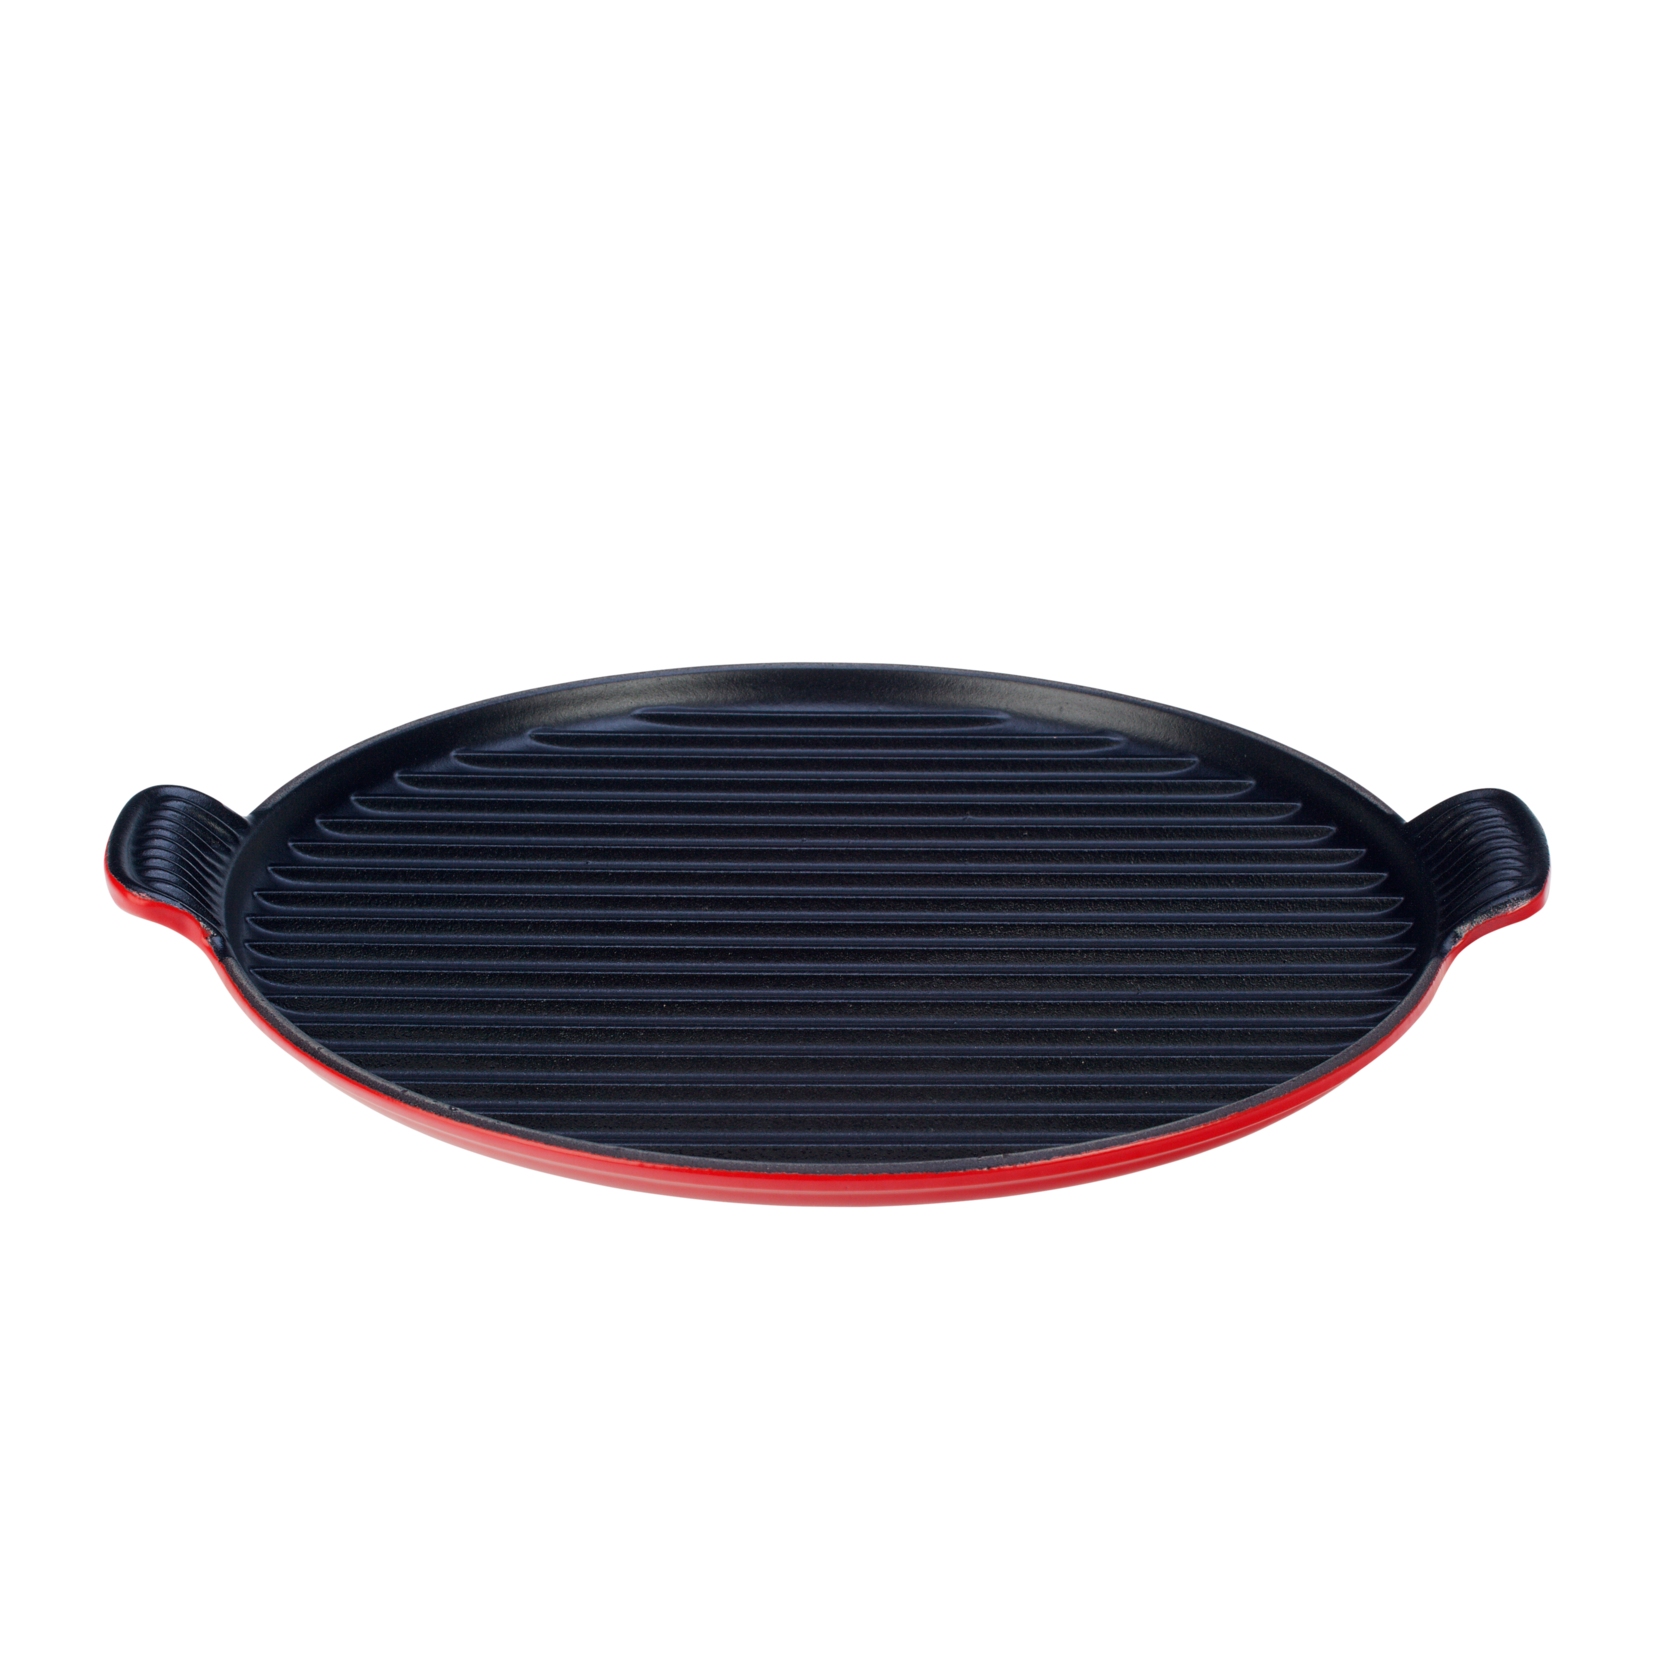 https://www.tattahome.com/50103-thickbox_default/le-creuset-round-grill-extralarge-32-cherry.jpg